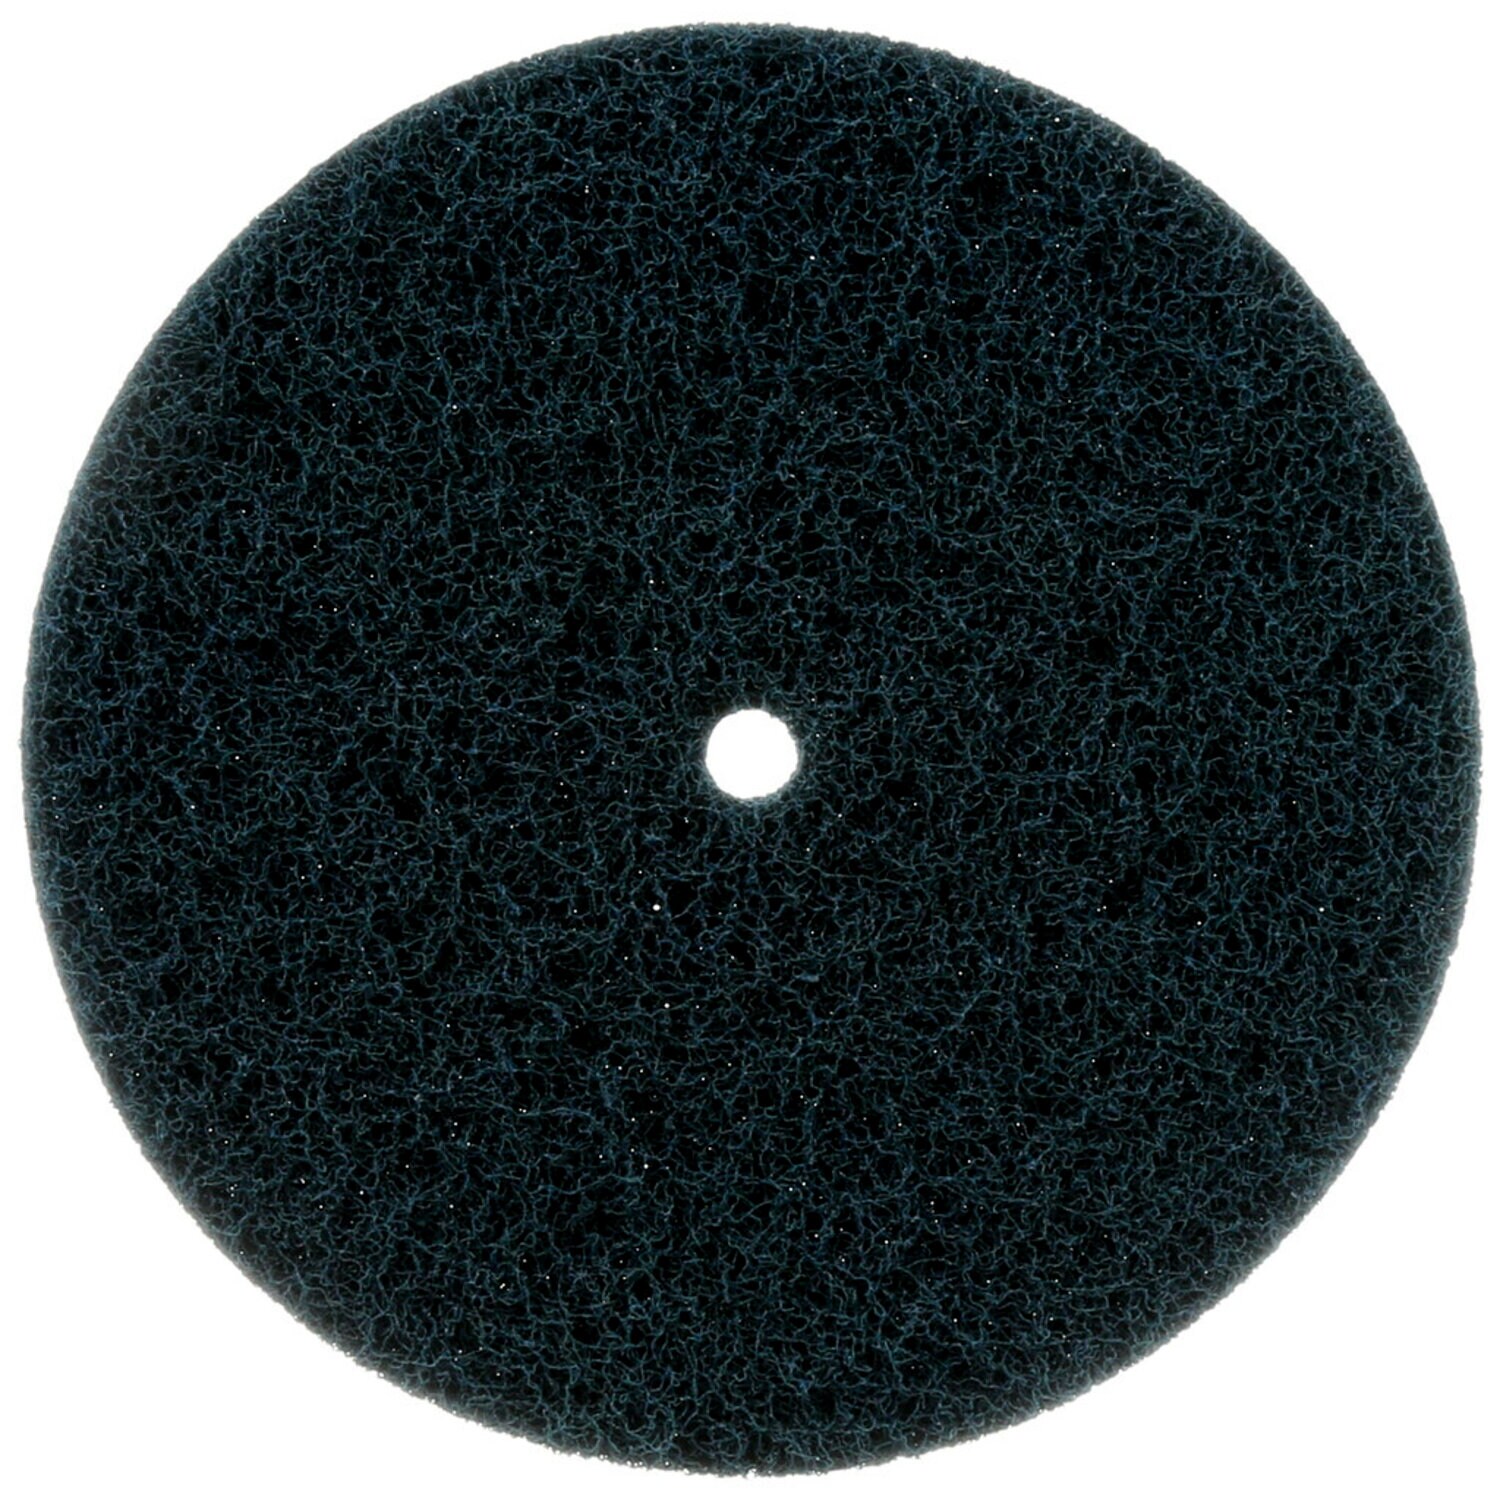 7010330831 - Standard Abrasives Buff and Blend HS Disc, 819130, 12 in x 1-1/4 in A
MED, 5/Pac, 25 ea/Case